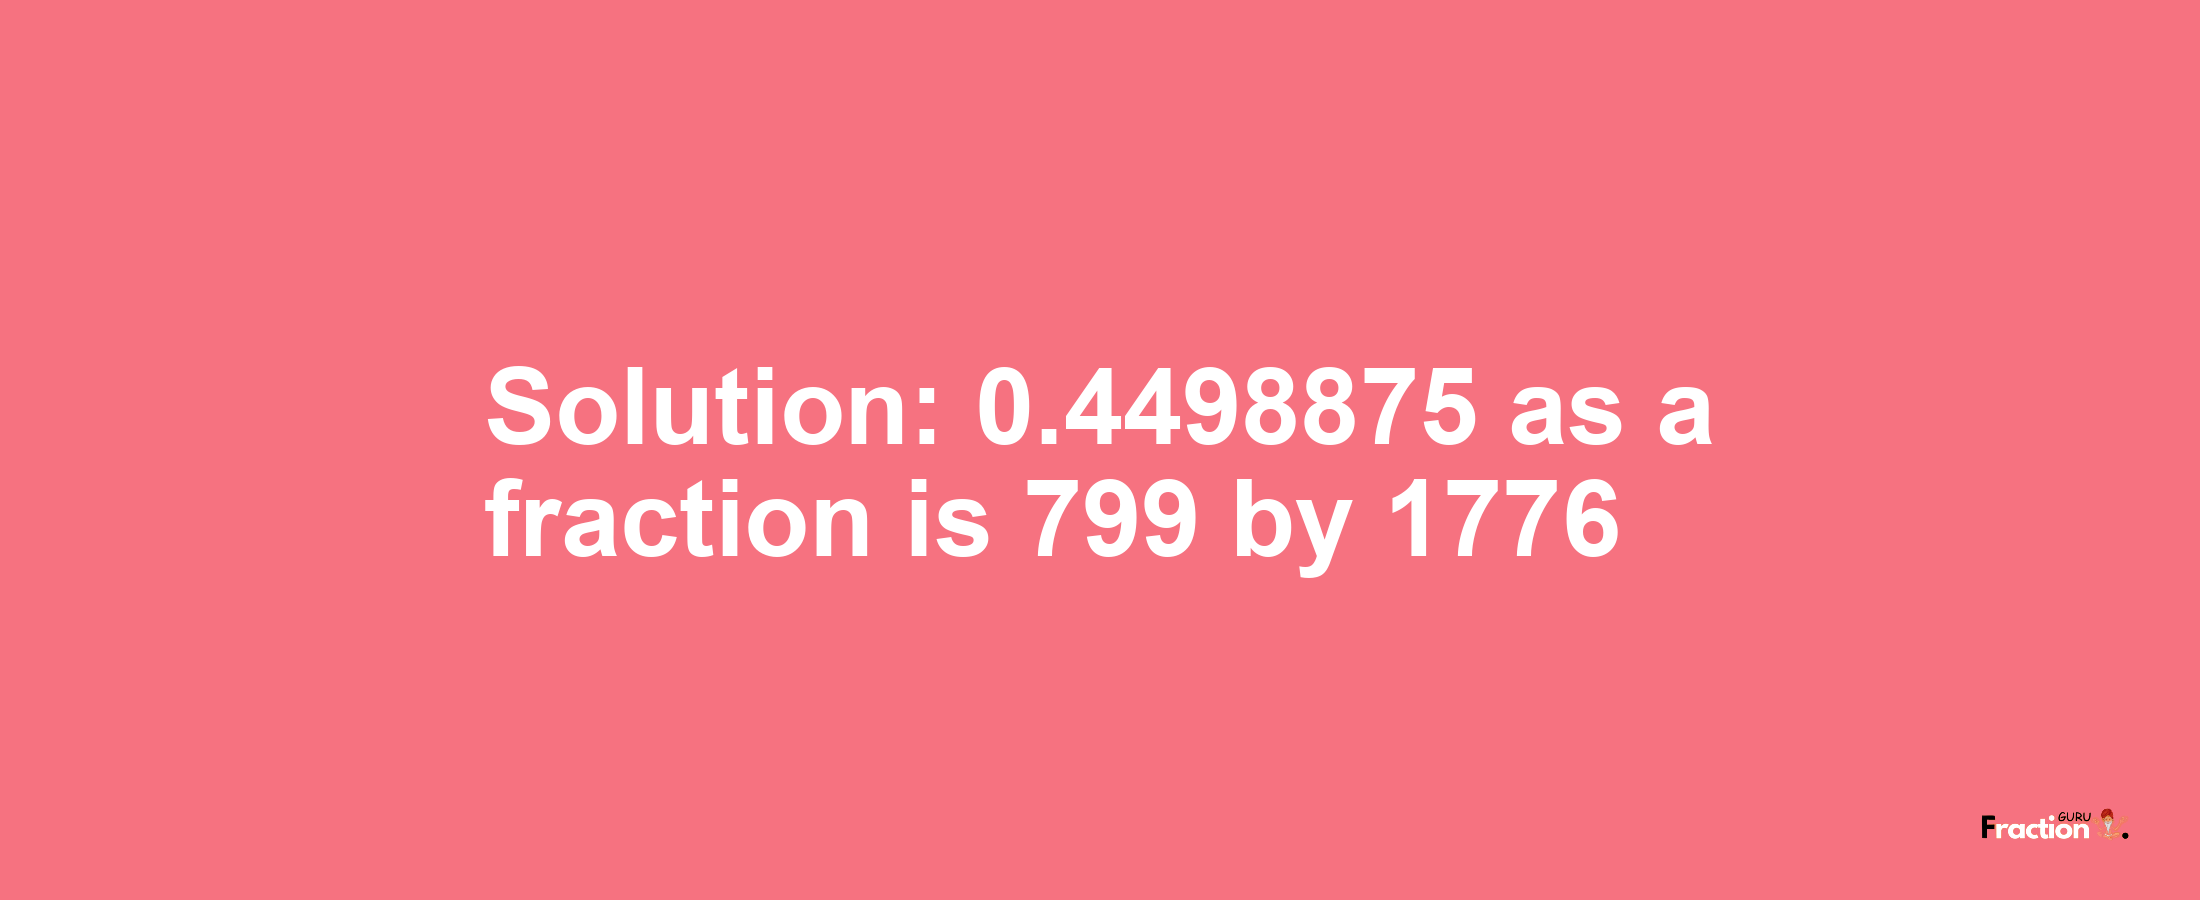 Solution:0.4498875 as a fraction is 799/1776